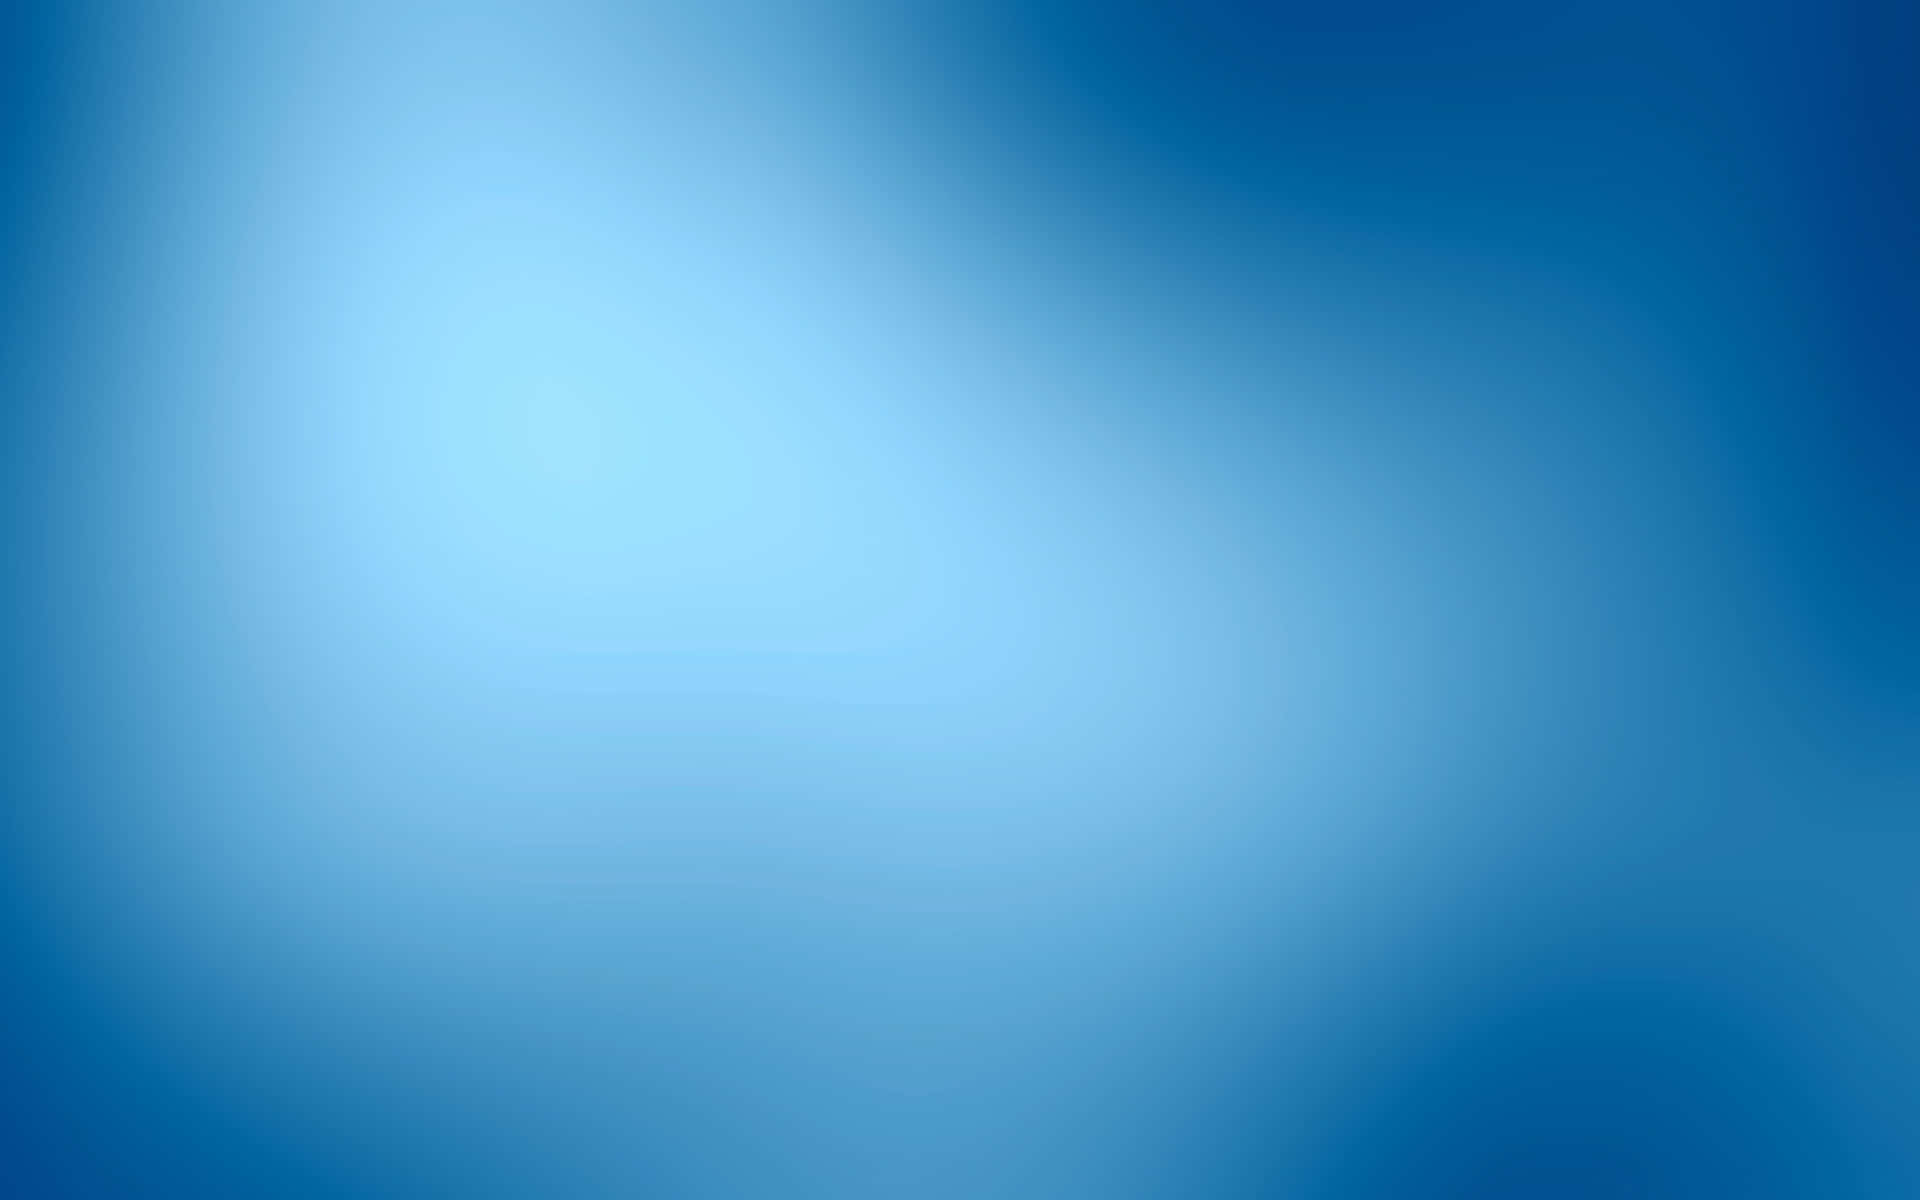 A calming Blue Grey background